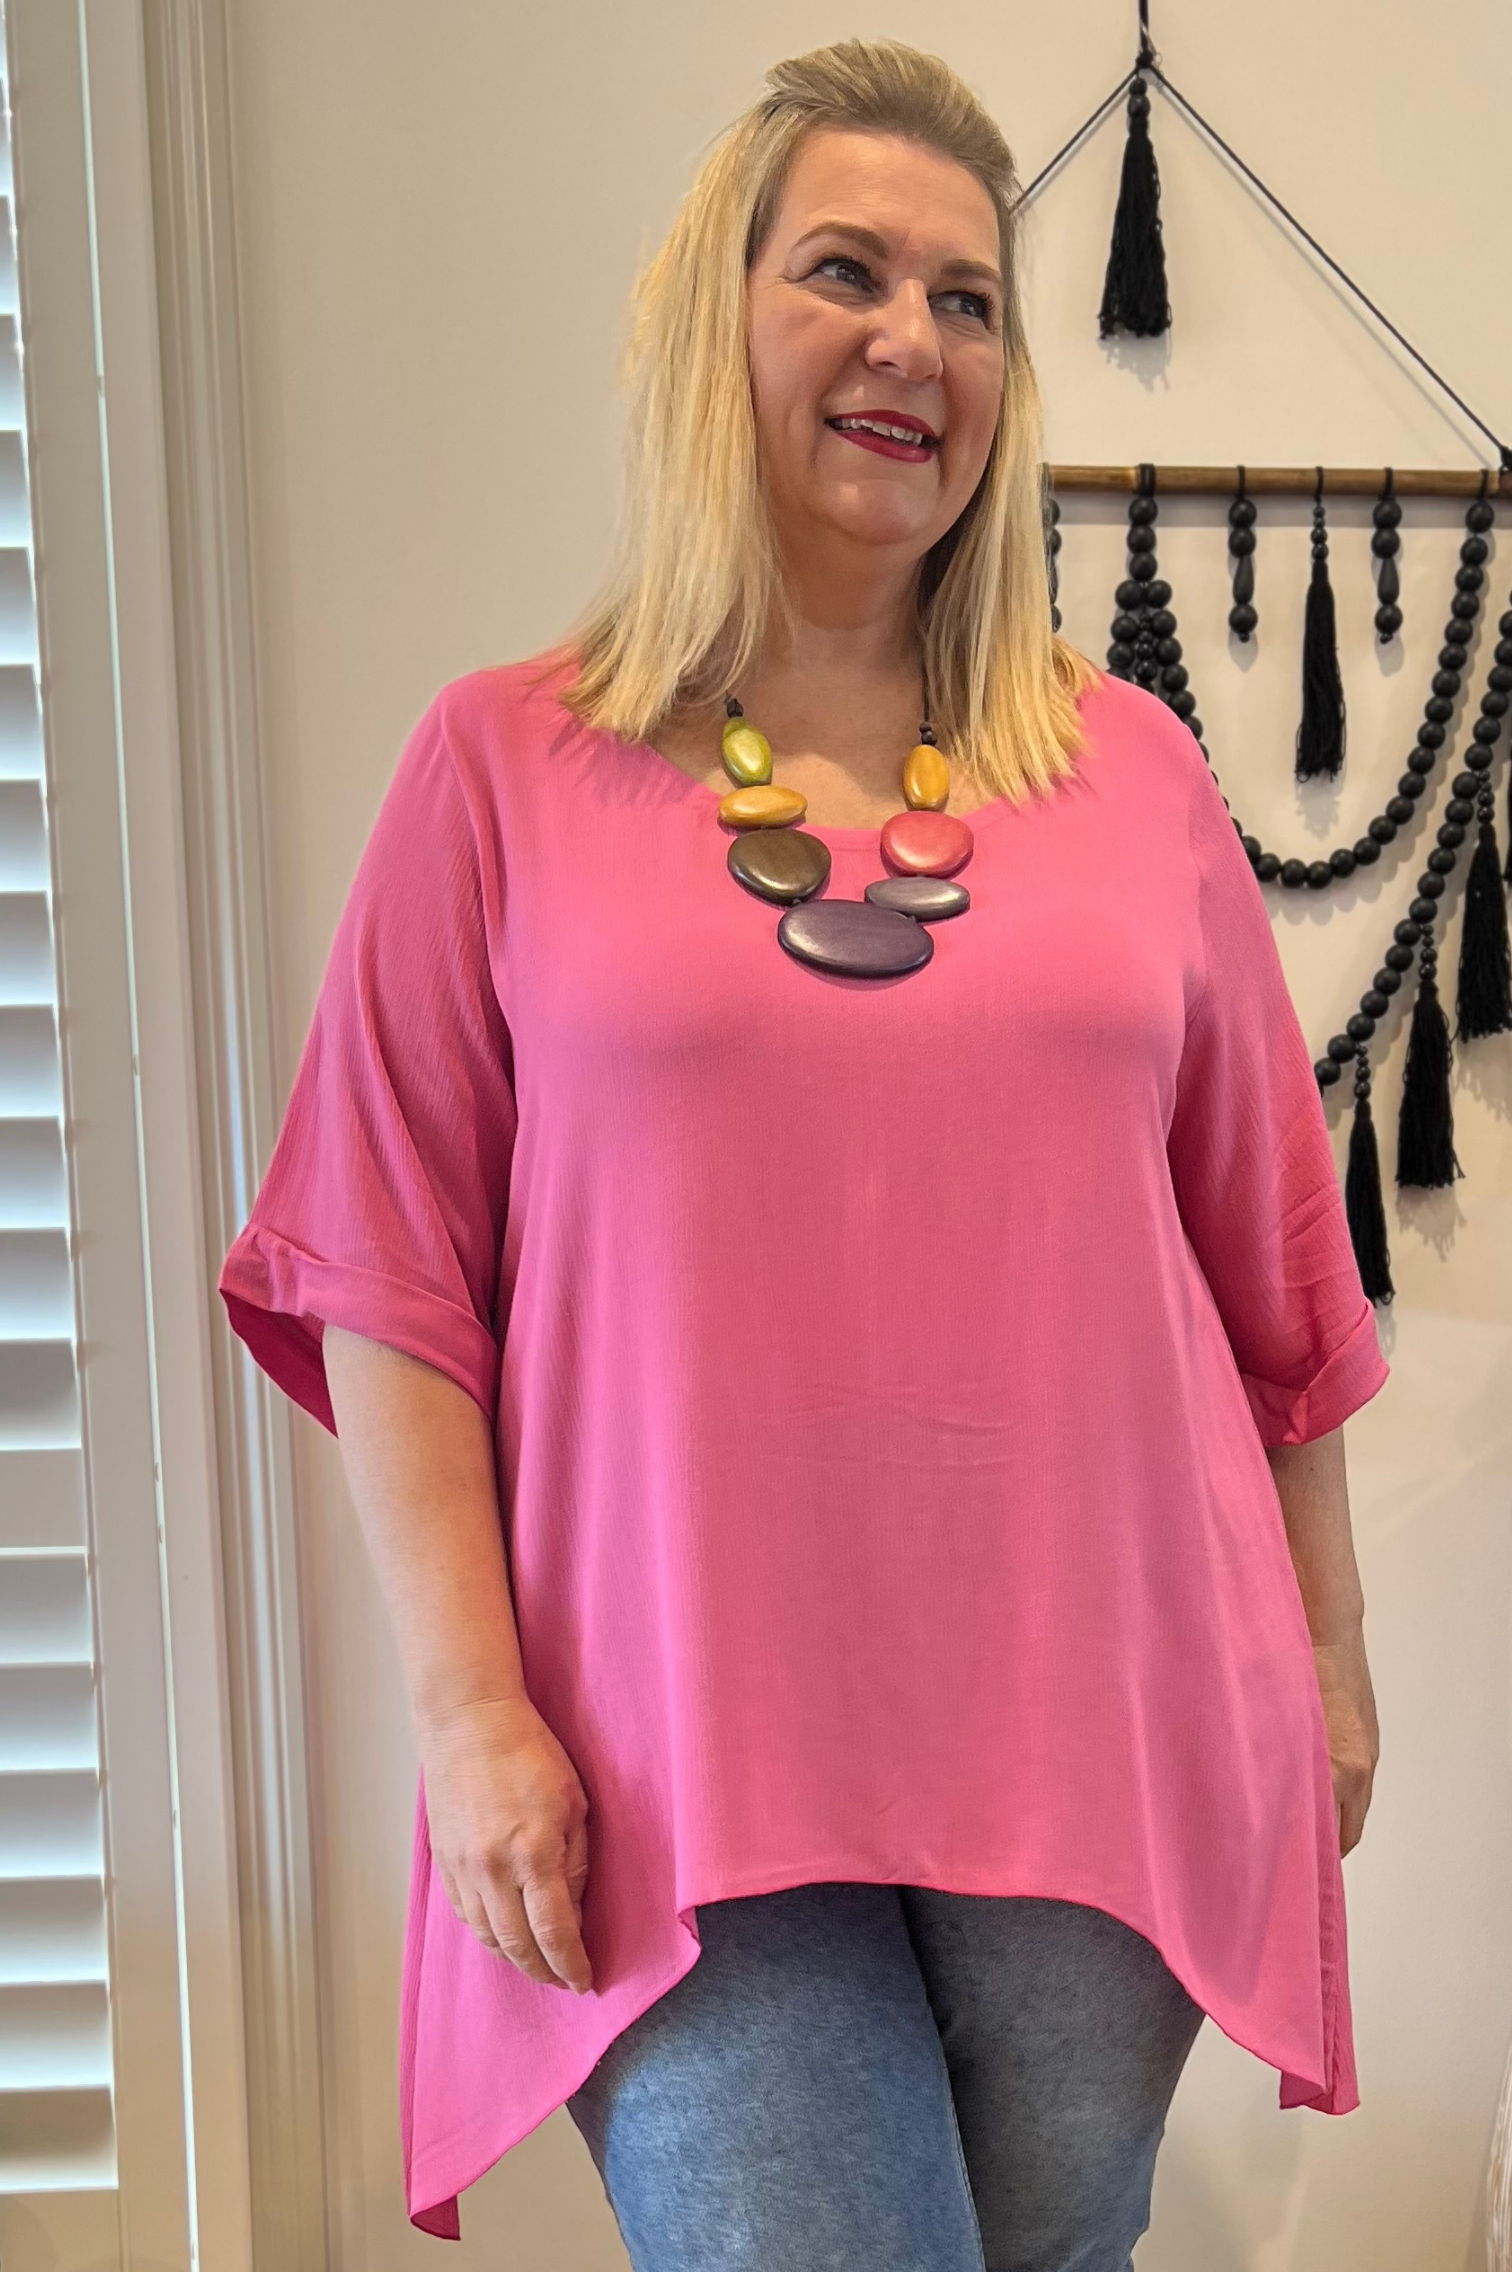 Kita Ku modelling a pretty pink scoop shaped top with a colourful necklace in a lounge setting. 